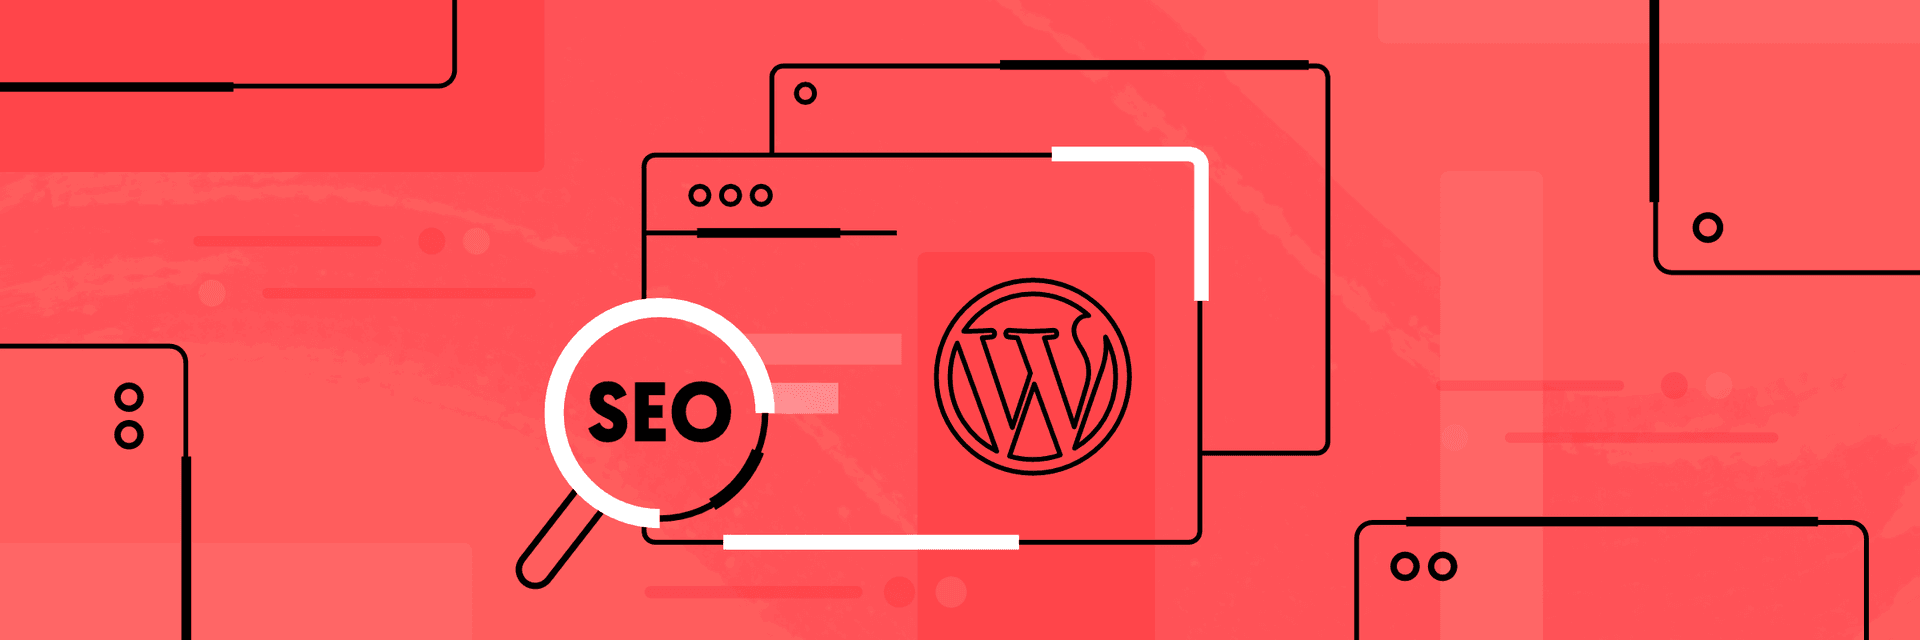 SXO for WordPress - Combine SEO and UX to Improve Your Website